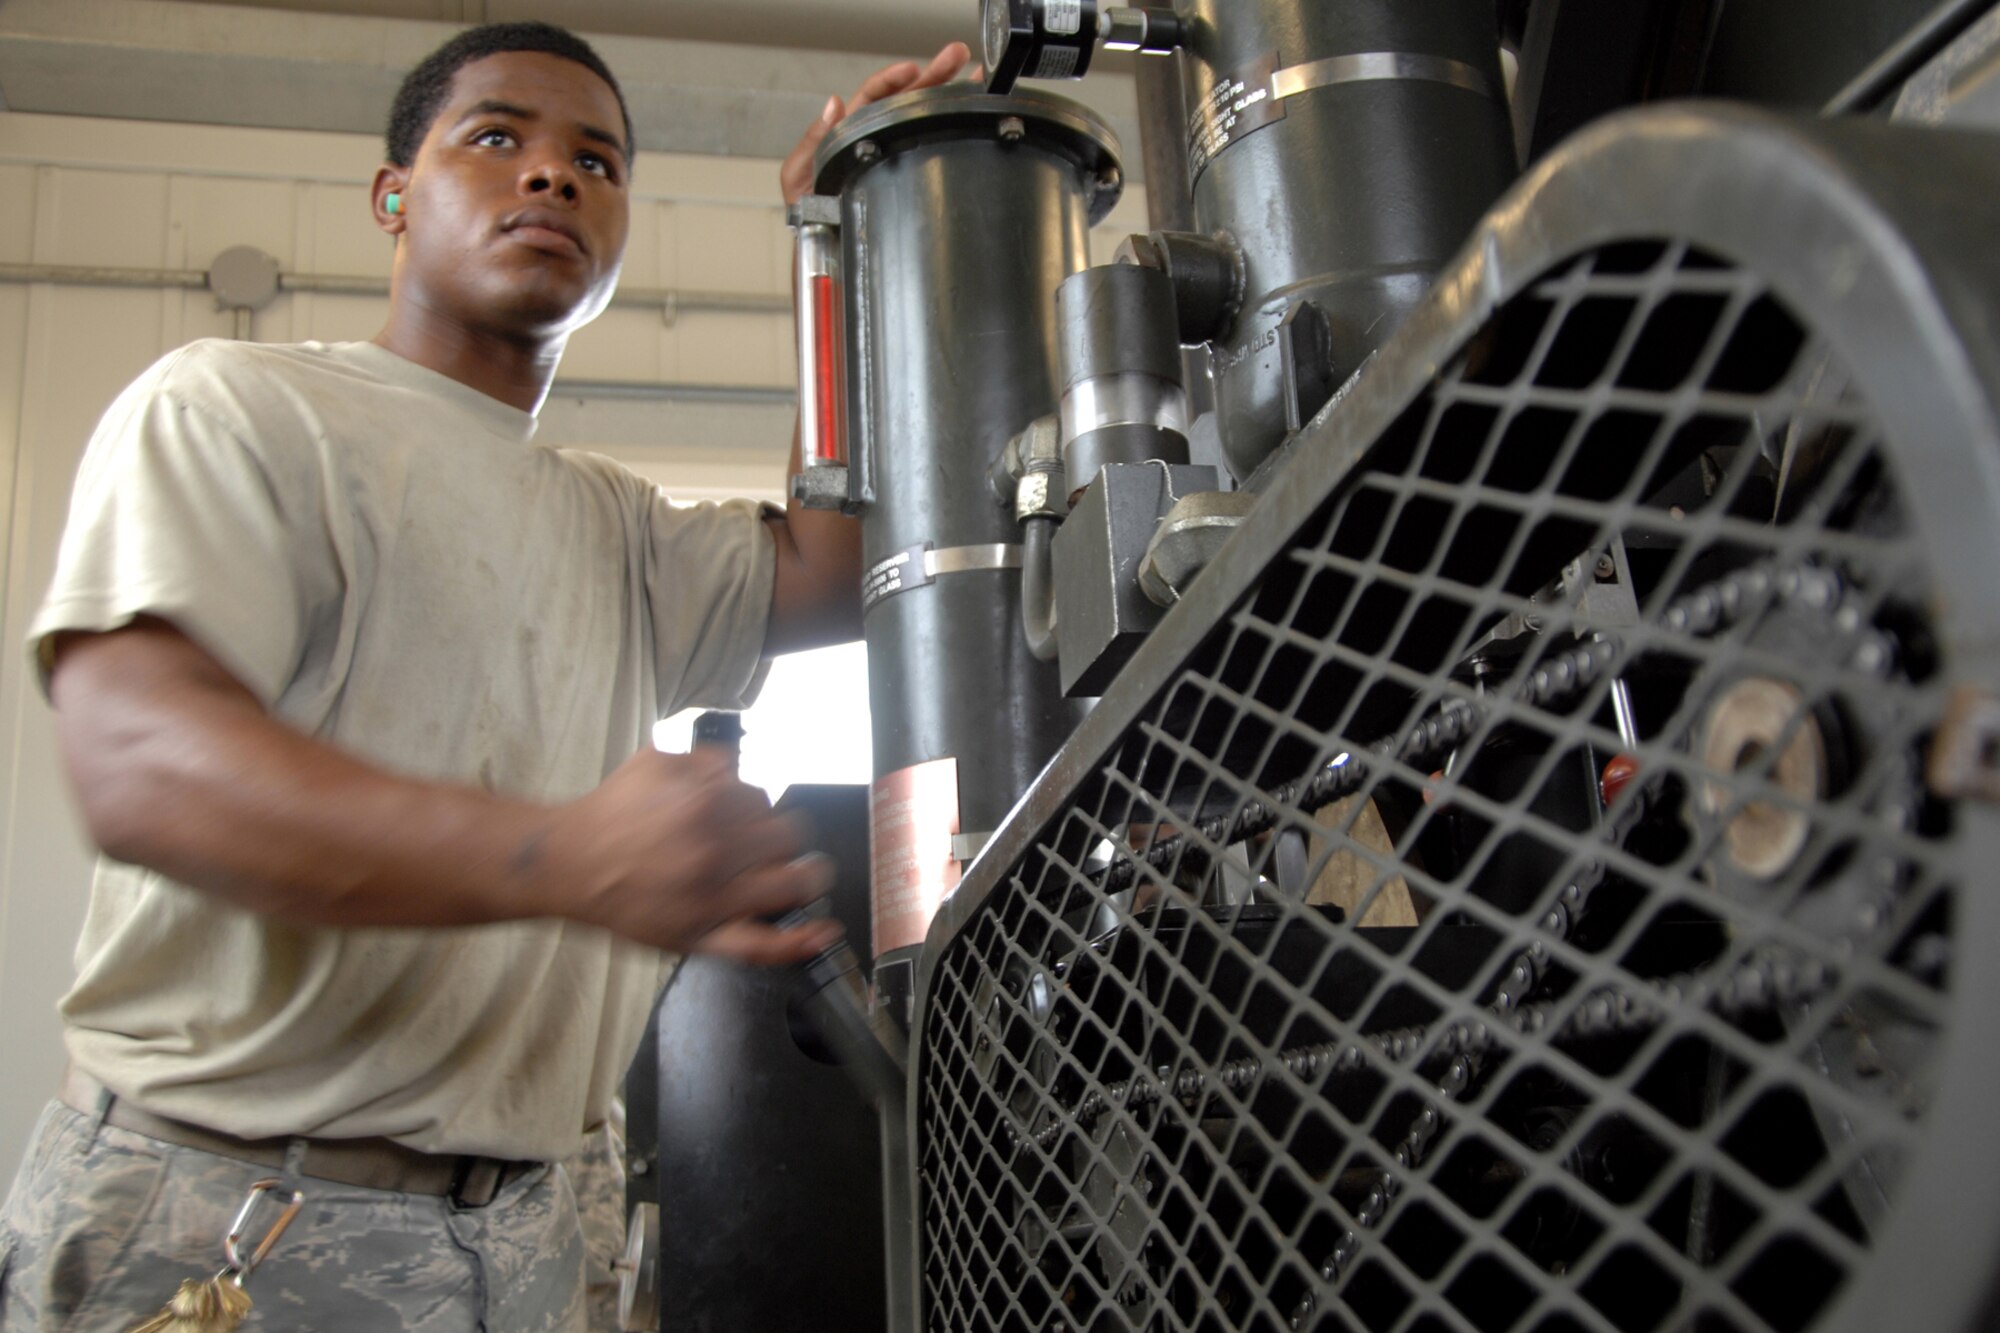 ANDERSEN AIR FORCE BASE, Guam -- Senior Airman Bryon Wilant, 36th Civil Engineer Squadron power production journeyman, operates an Aircraft Arresting System. Power production successfully completed the certification of two barrier arresting kits on the flightline, June 19. (U.S. Air Force photo by Airman 1st Class Anthony Jennings)